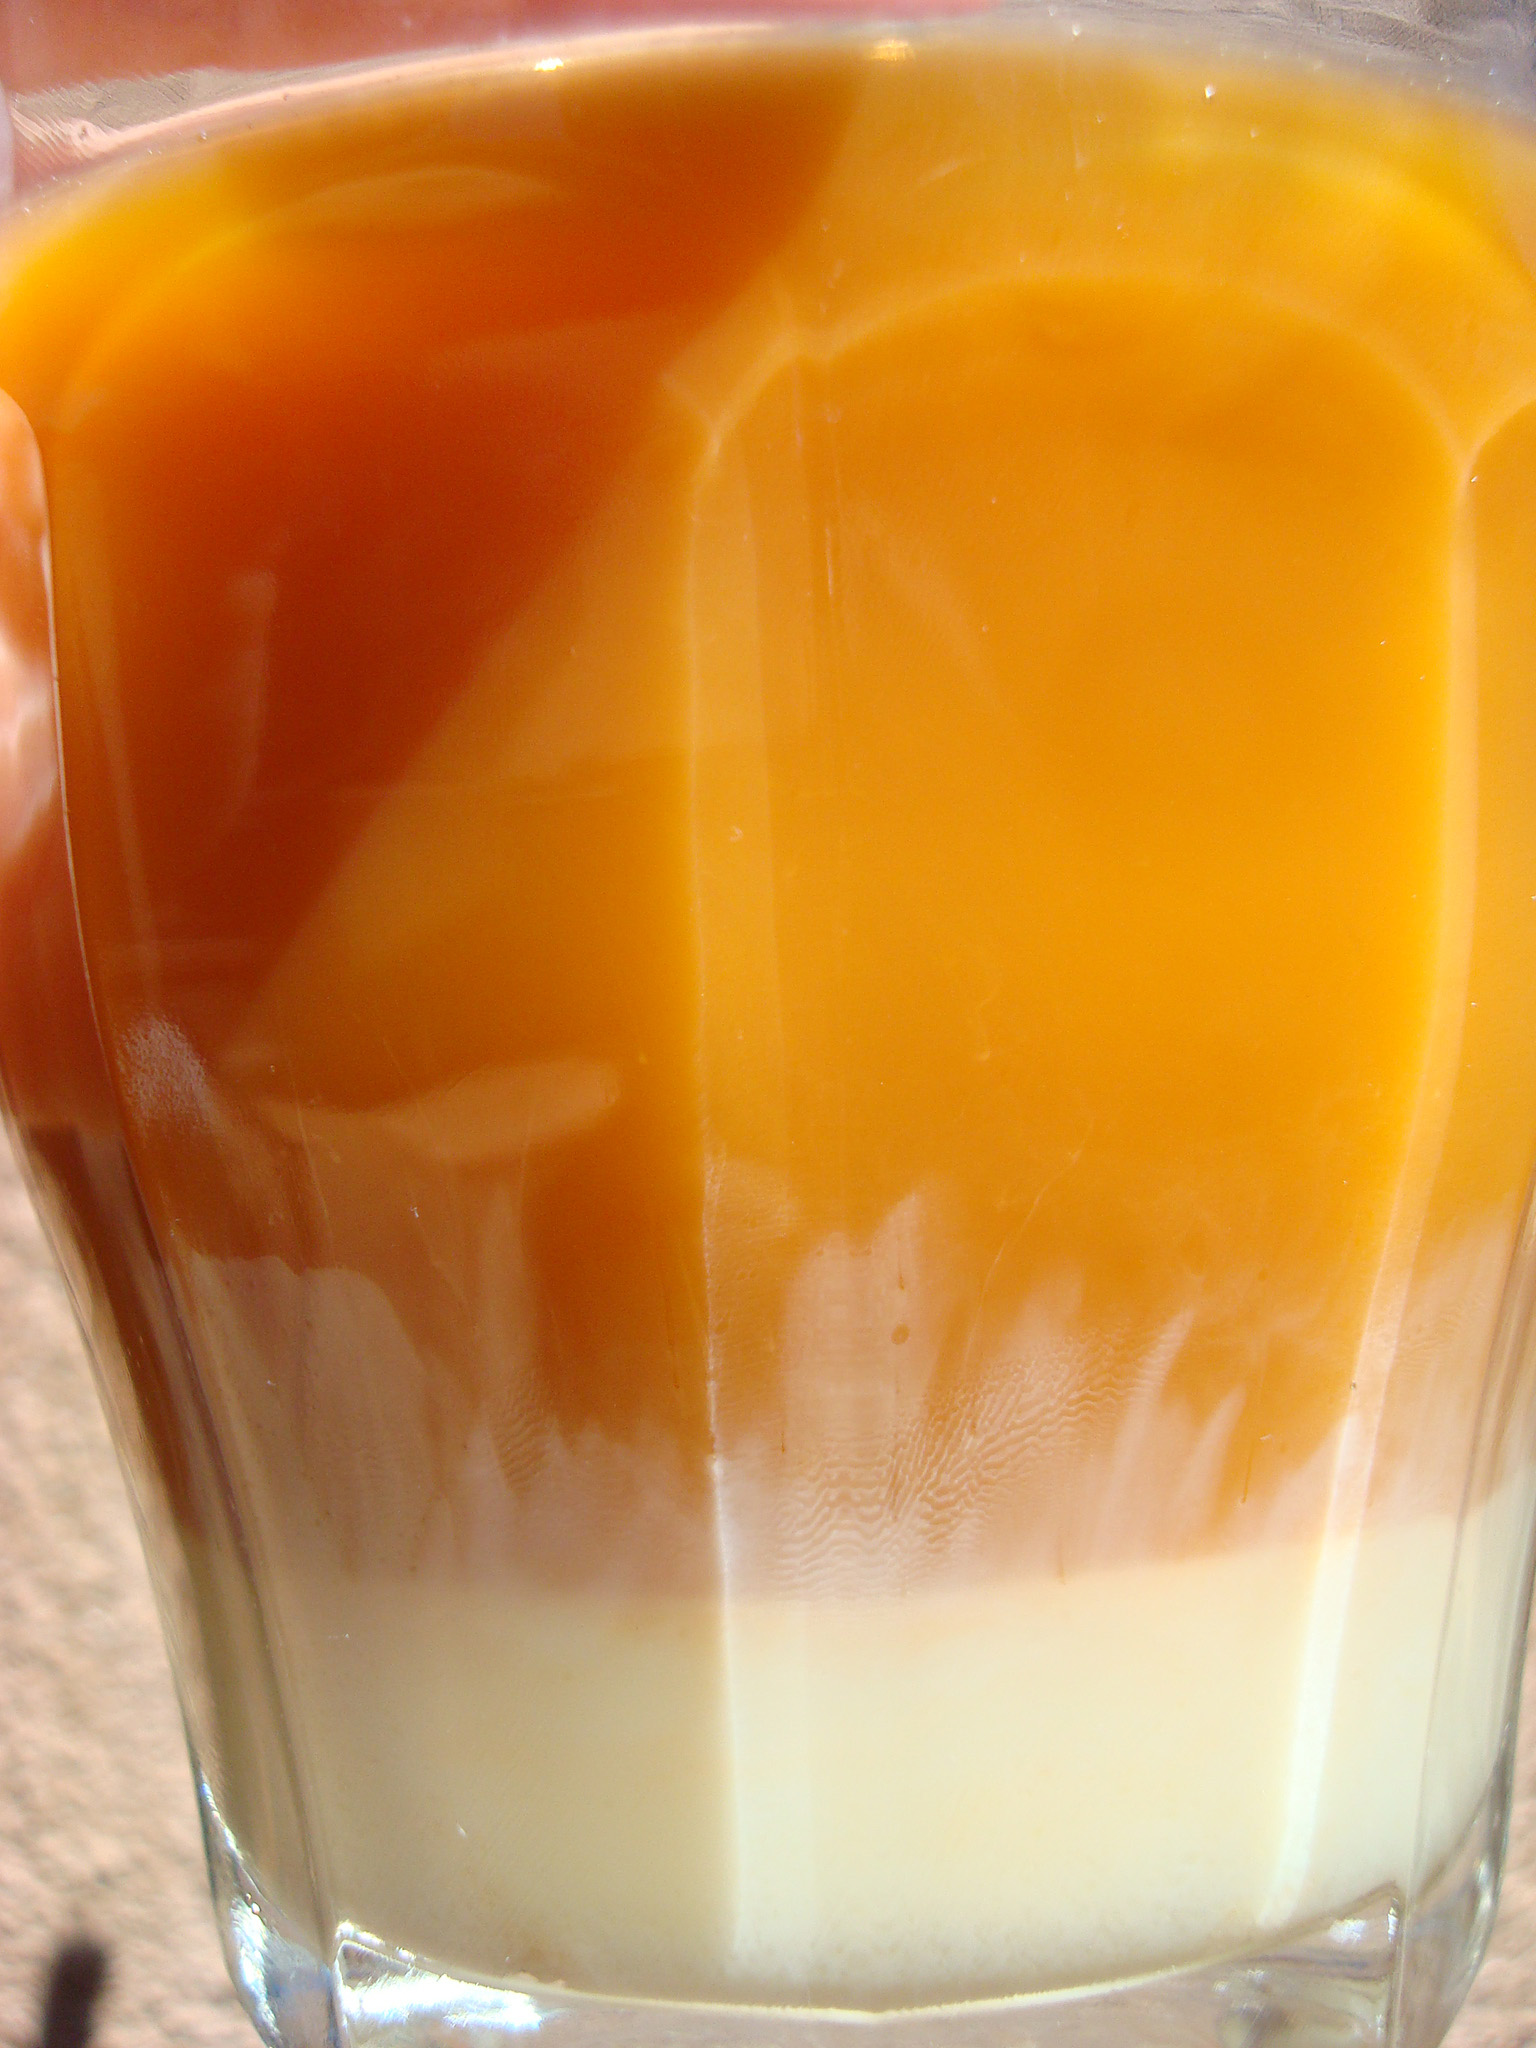 Delicious and Refreshing Homemade Thai Iced Tea!